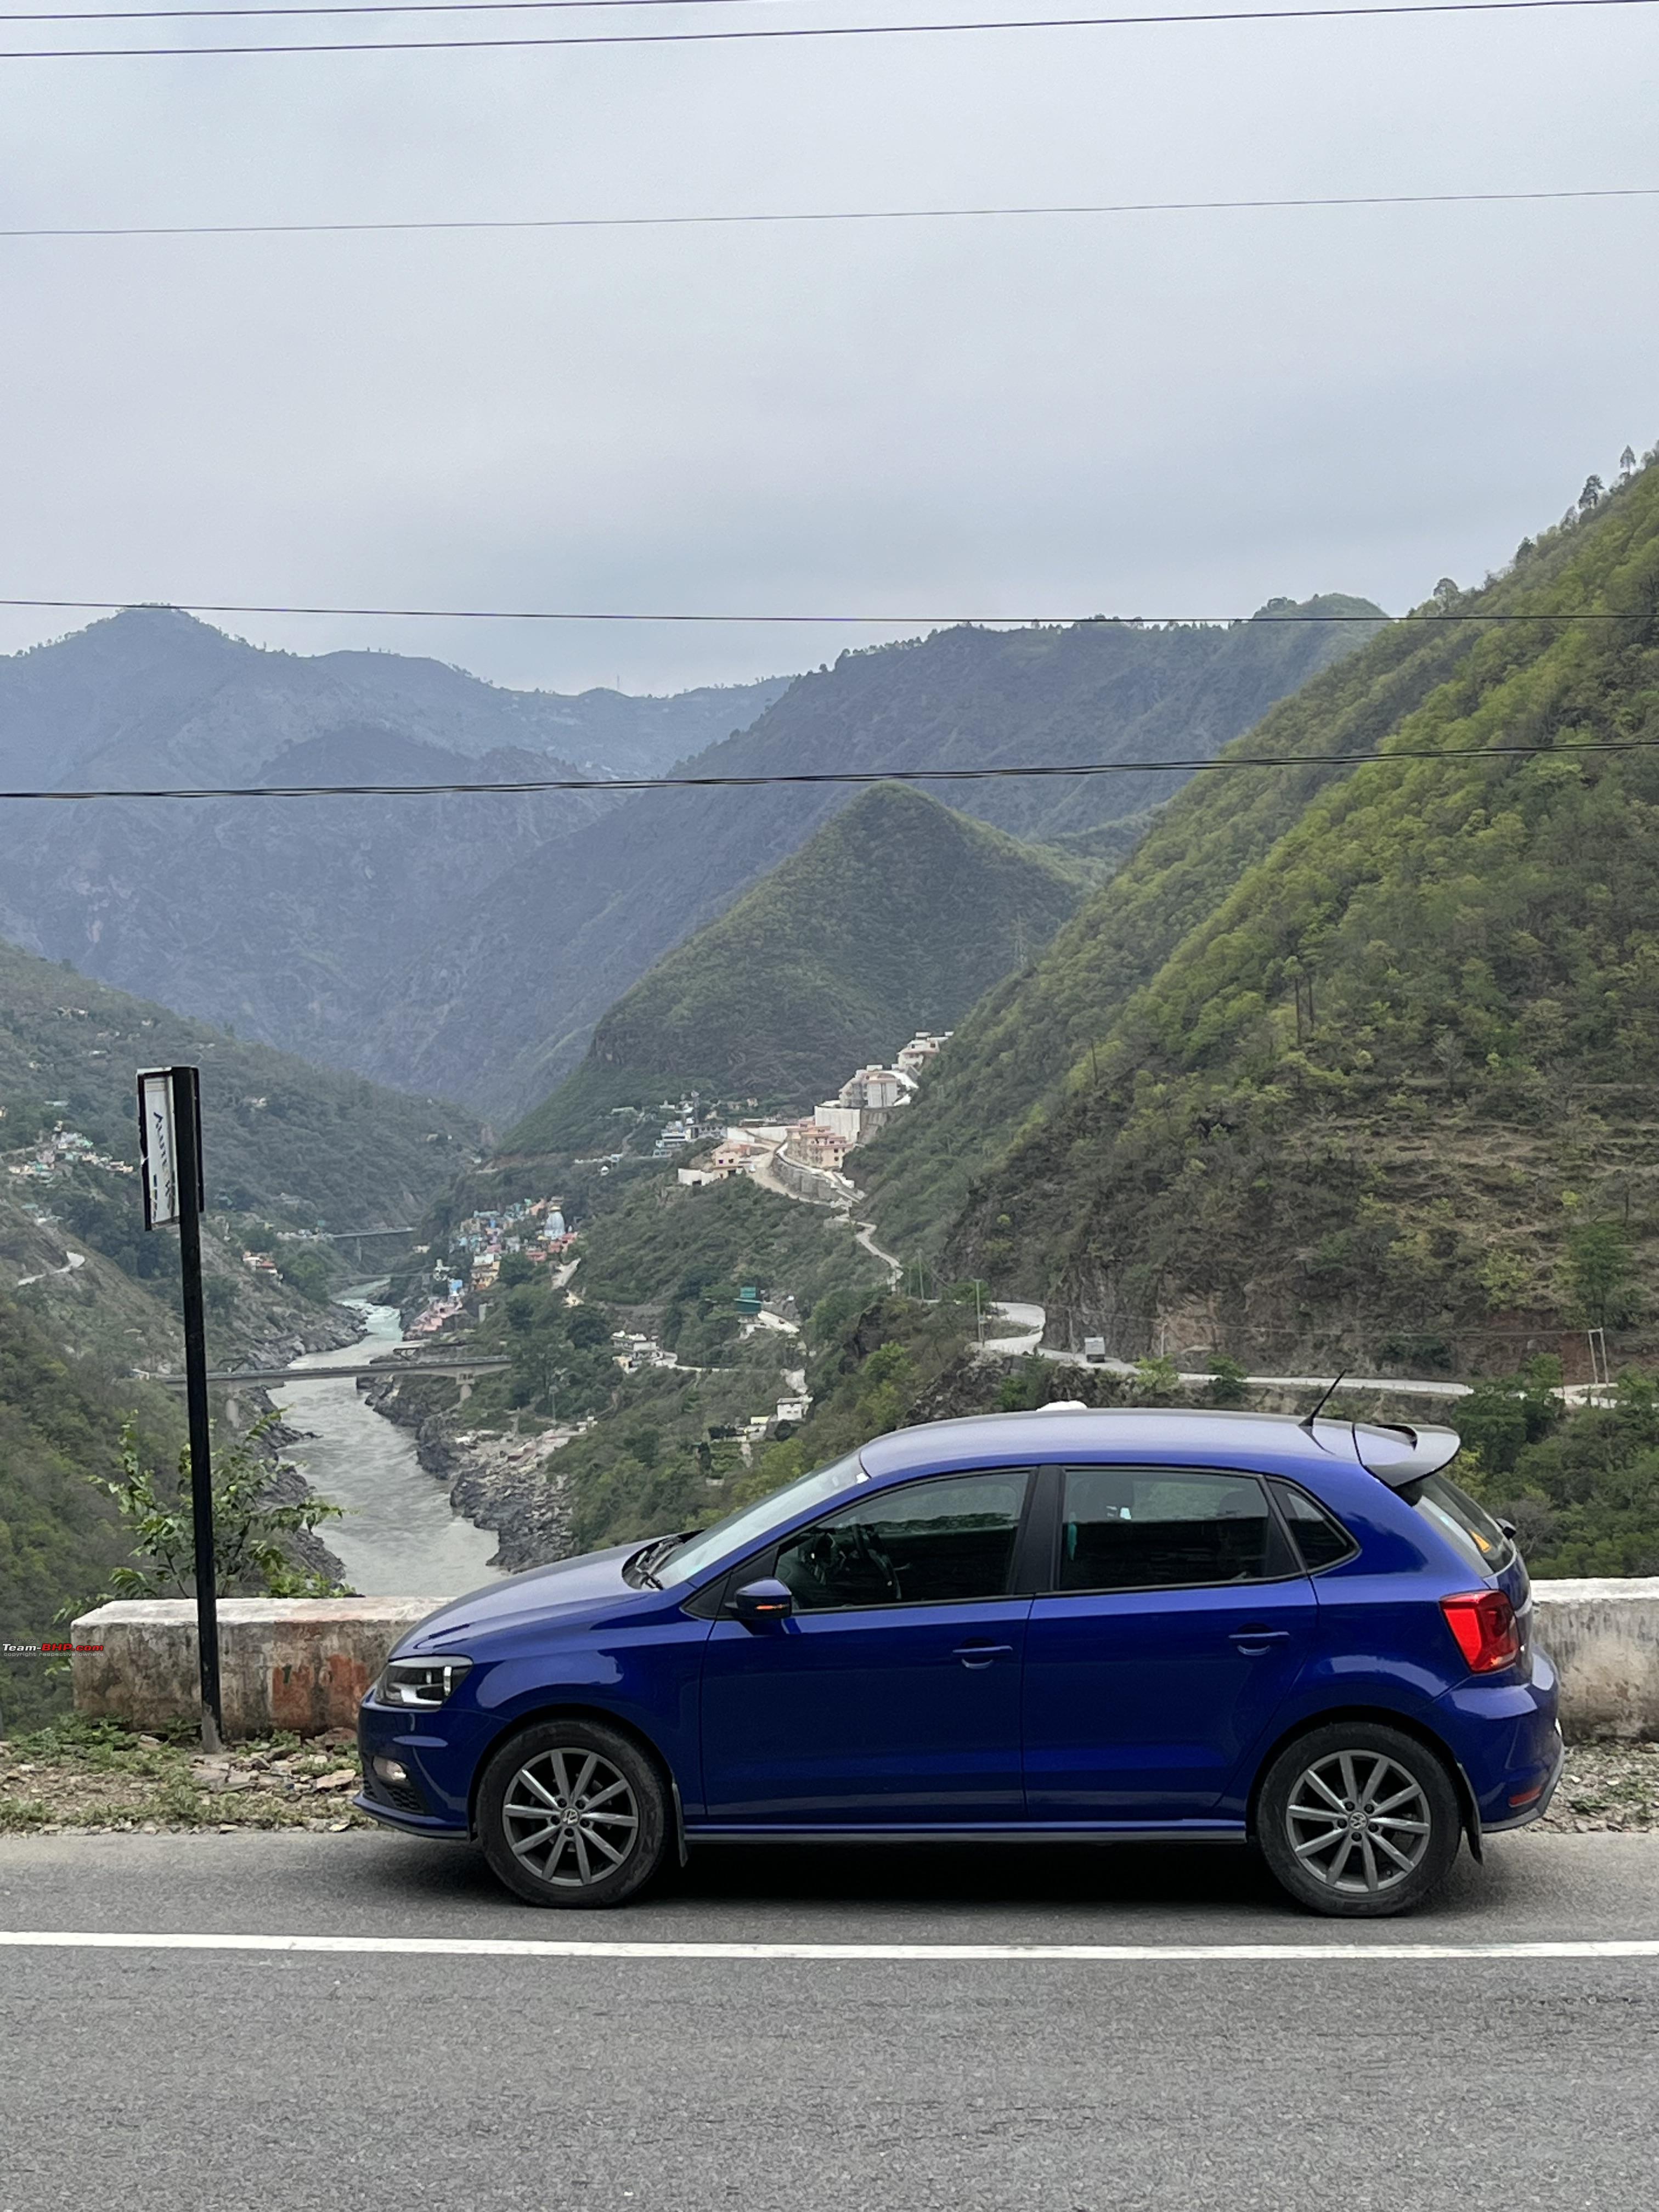 Volkswagen Polo 1.0L TSI : Official Review - Page 69 - Team-BHP